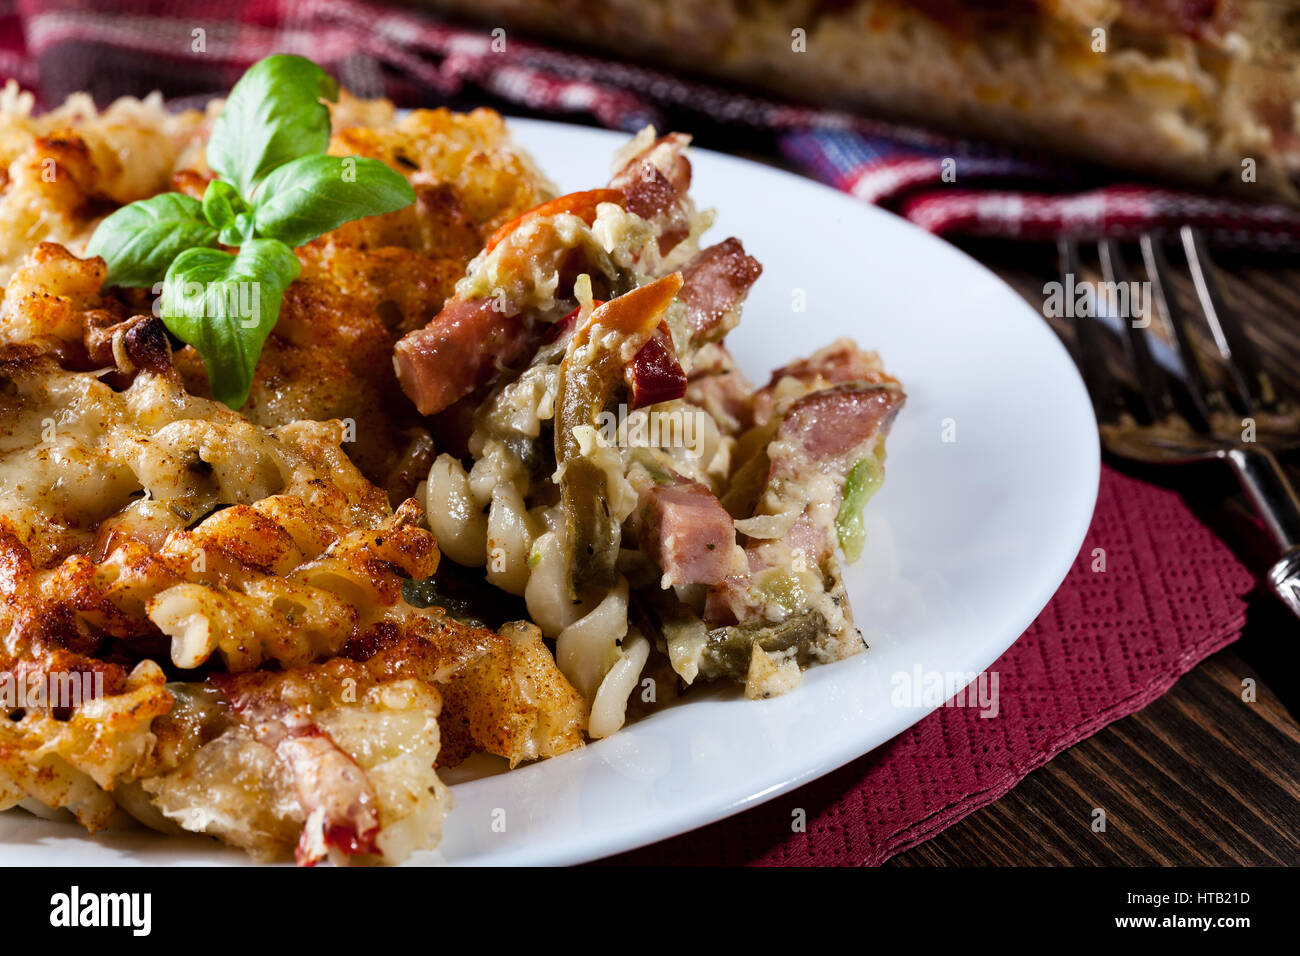 Portion of fusilli pasta casseroles, sausages and zucchini on a plate Stock Photo